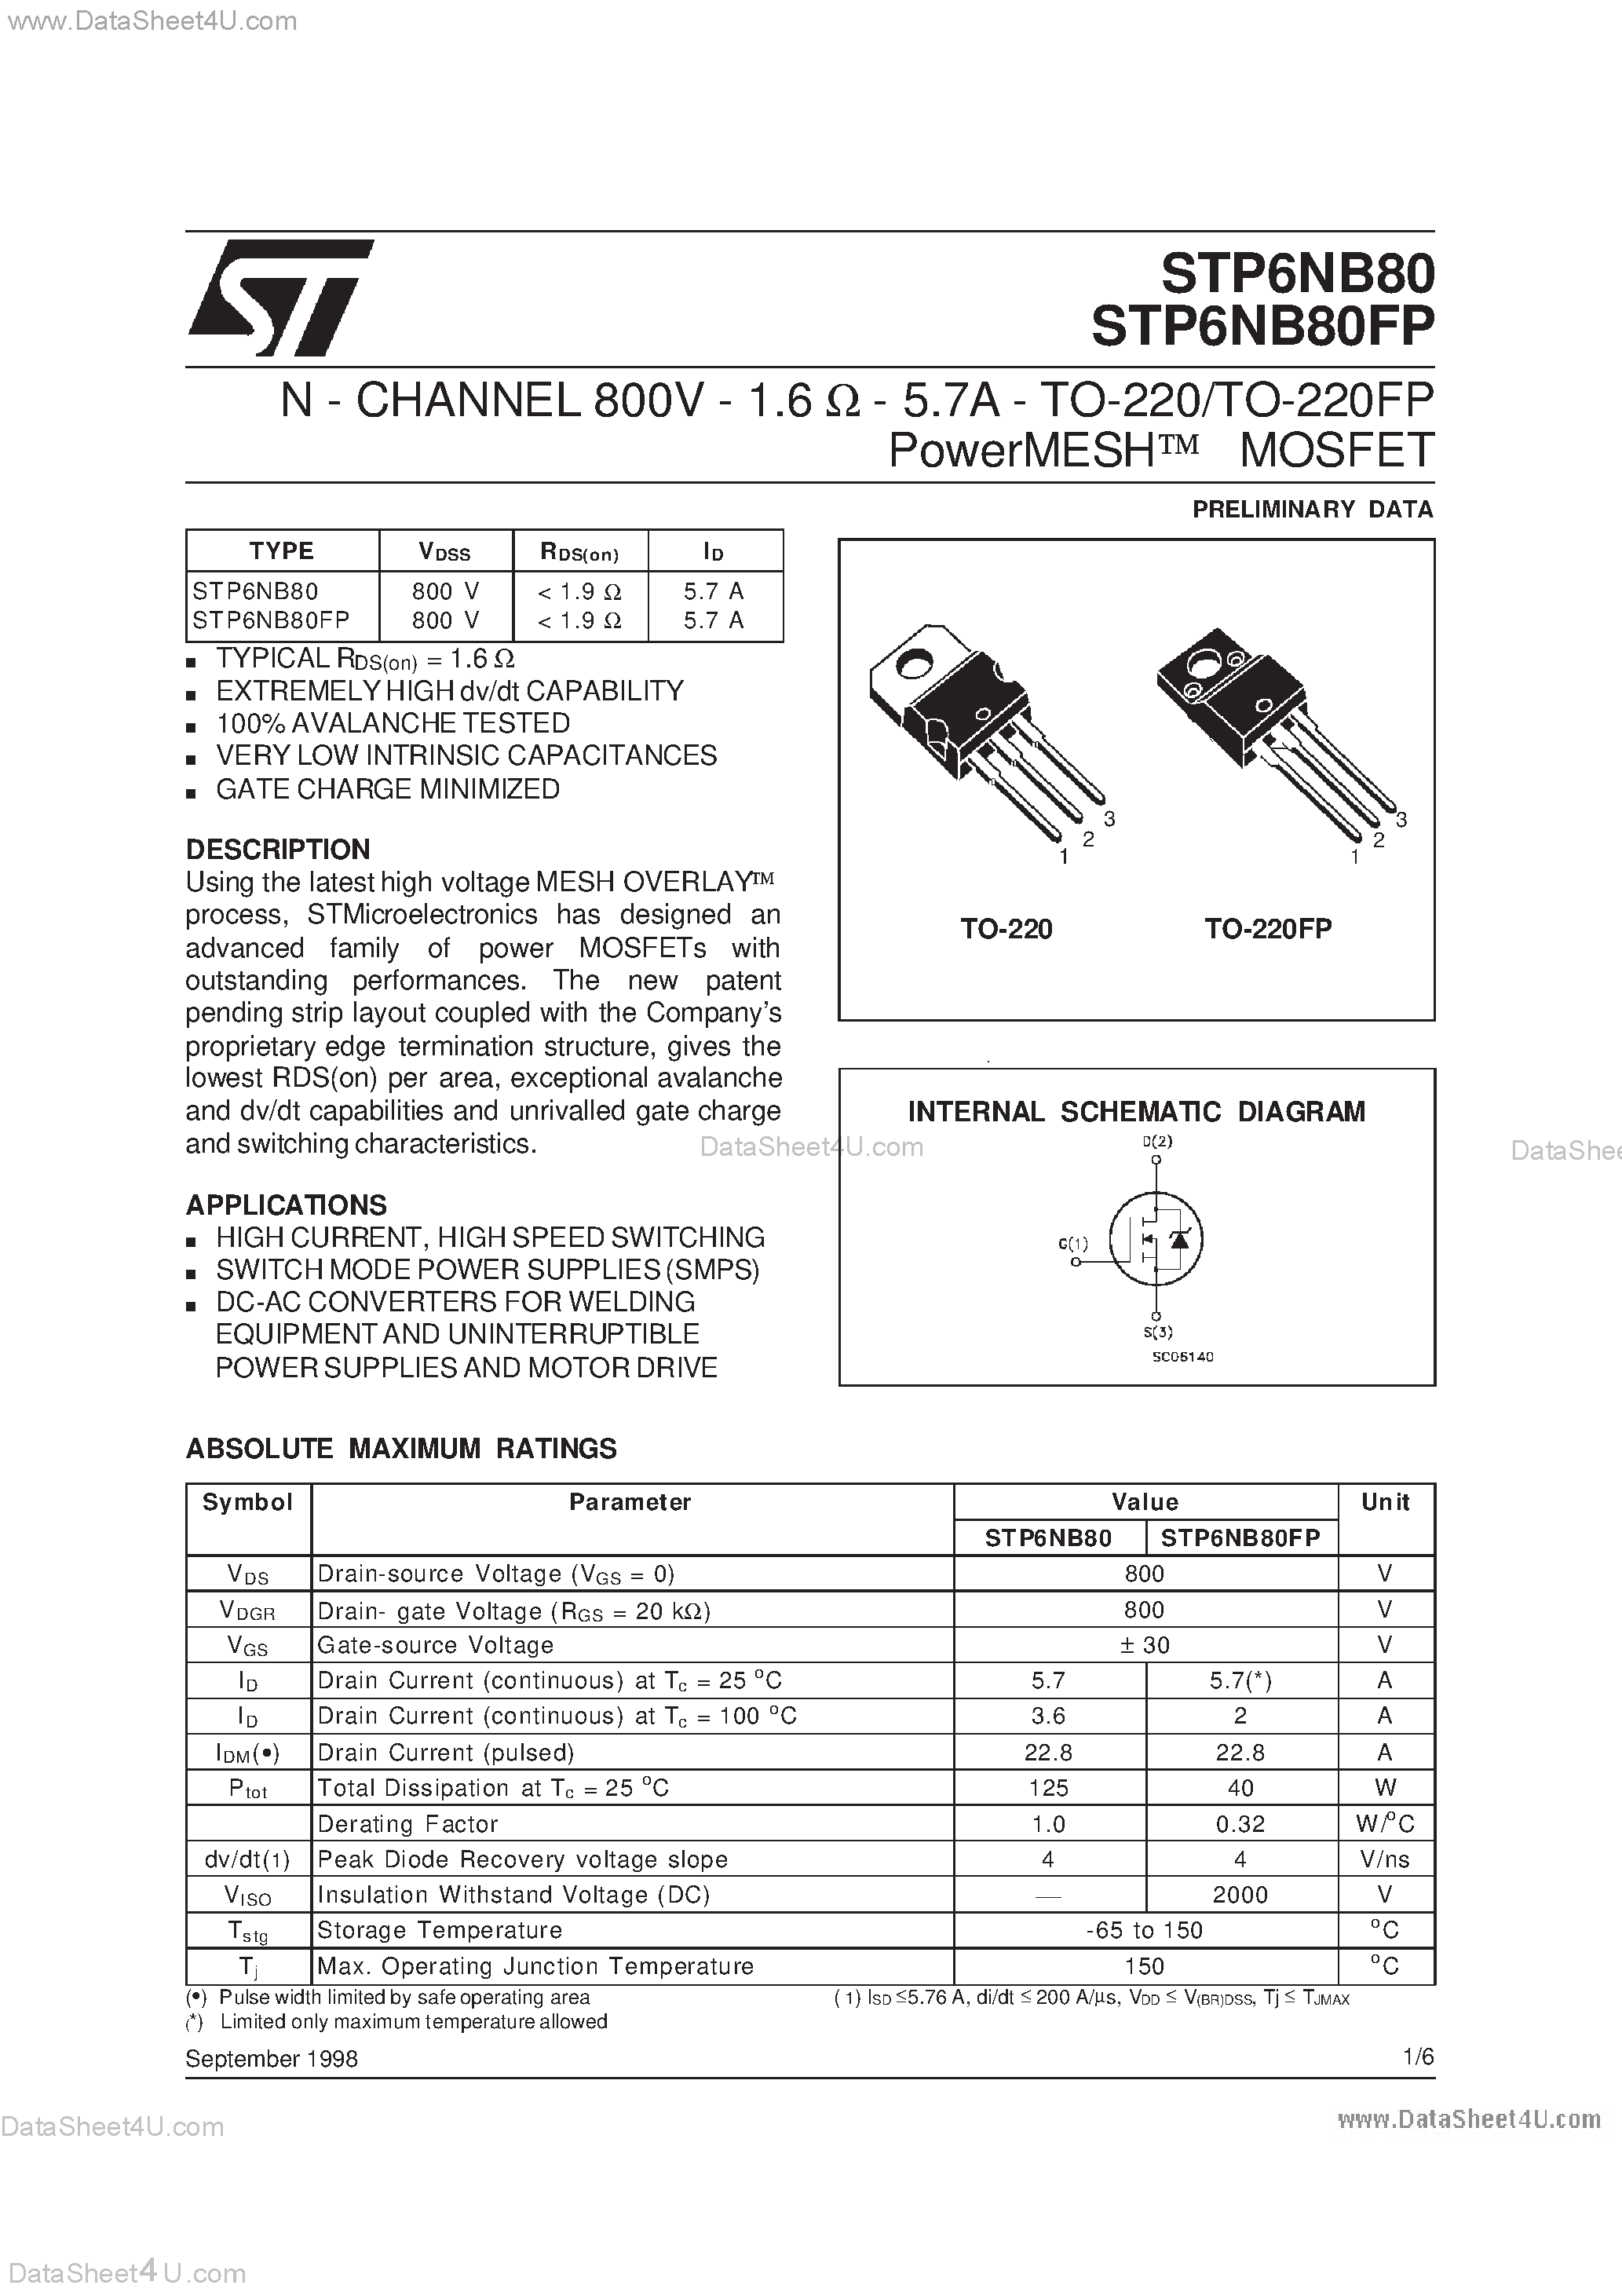 Даташит STP6NB80 - N - CHANNEL 800V - 1.6 Ohm - 5.7A - TO-220/TO-220FP страница 1